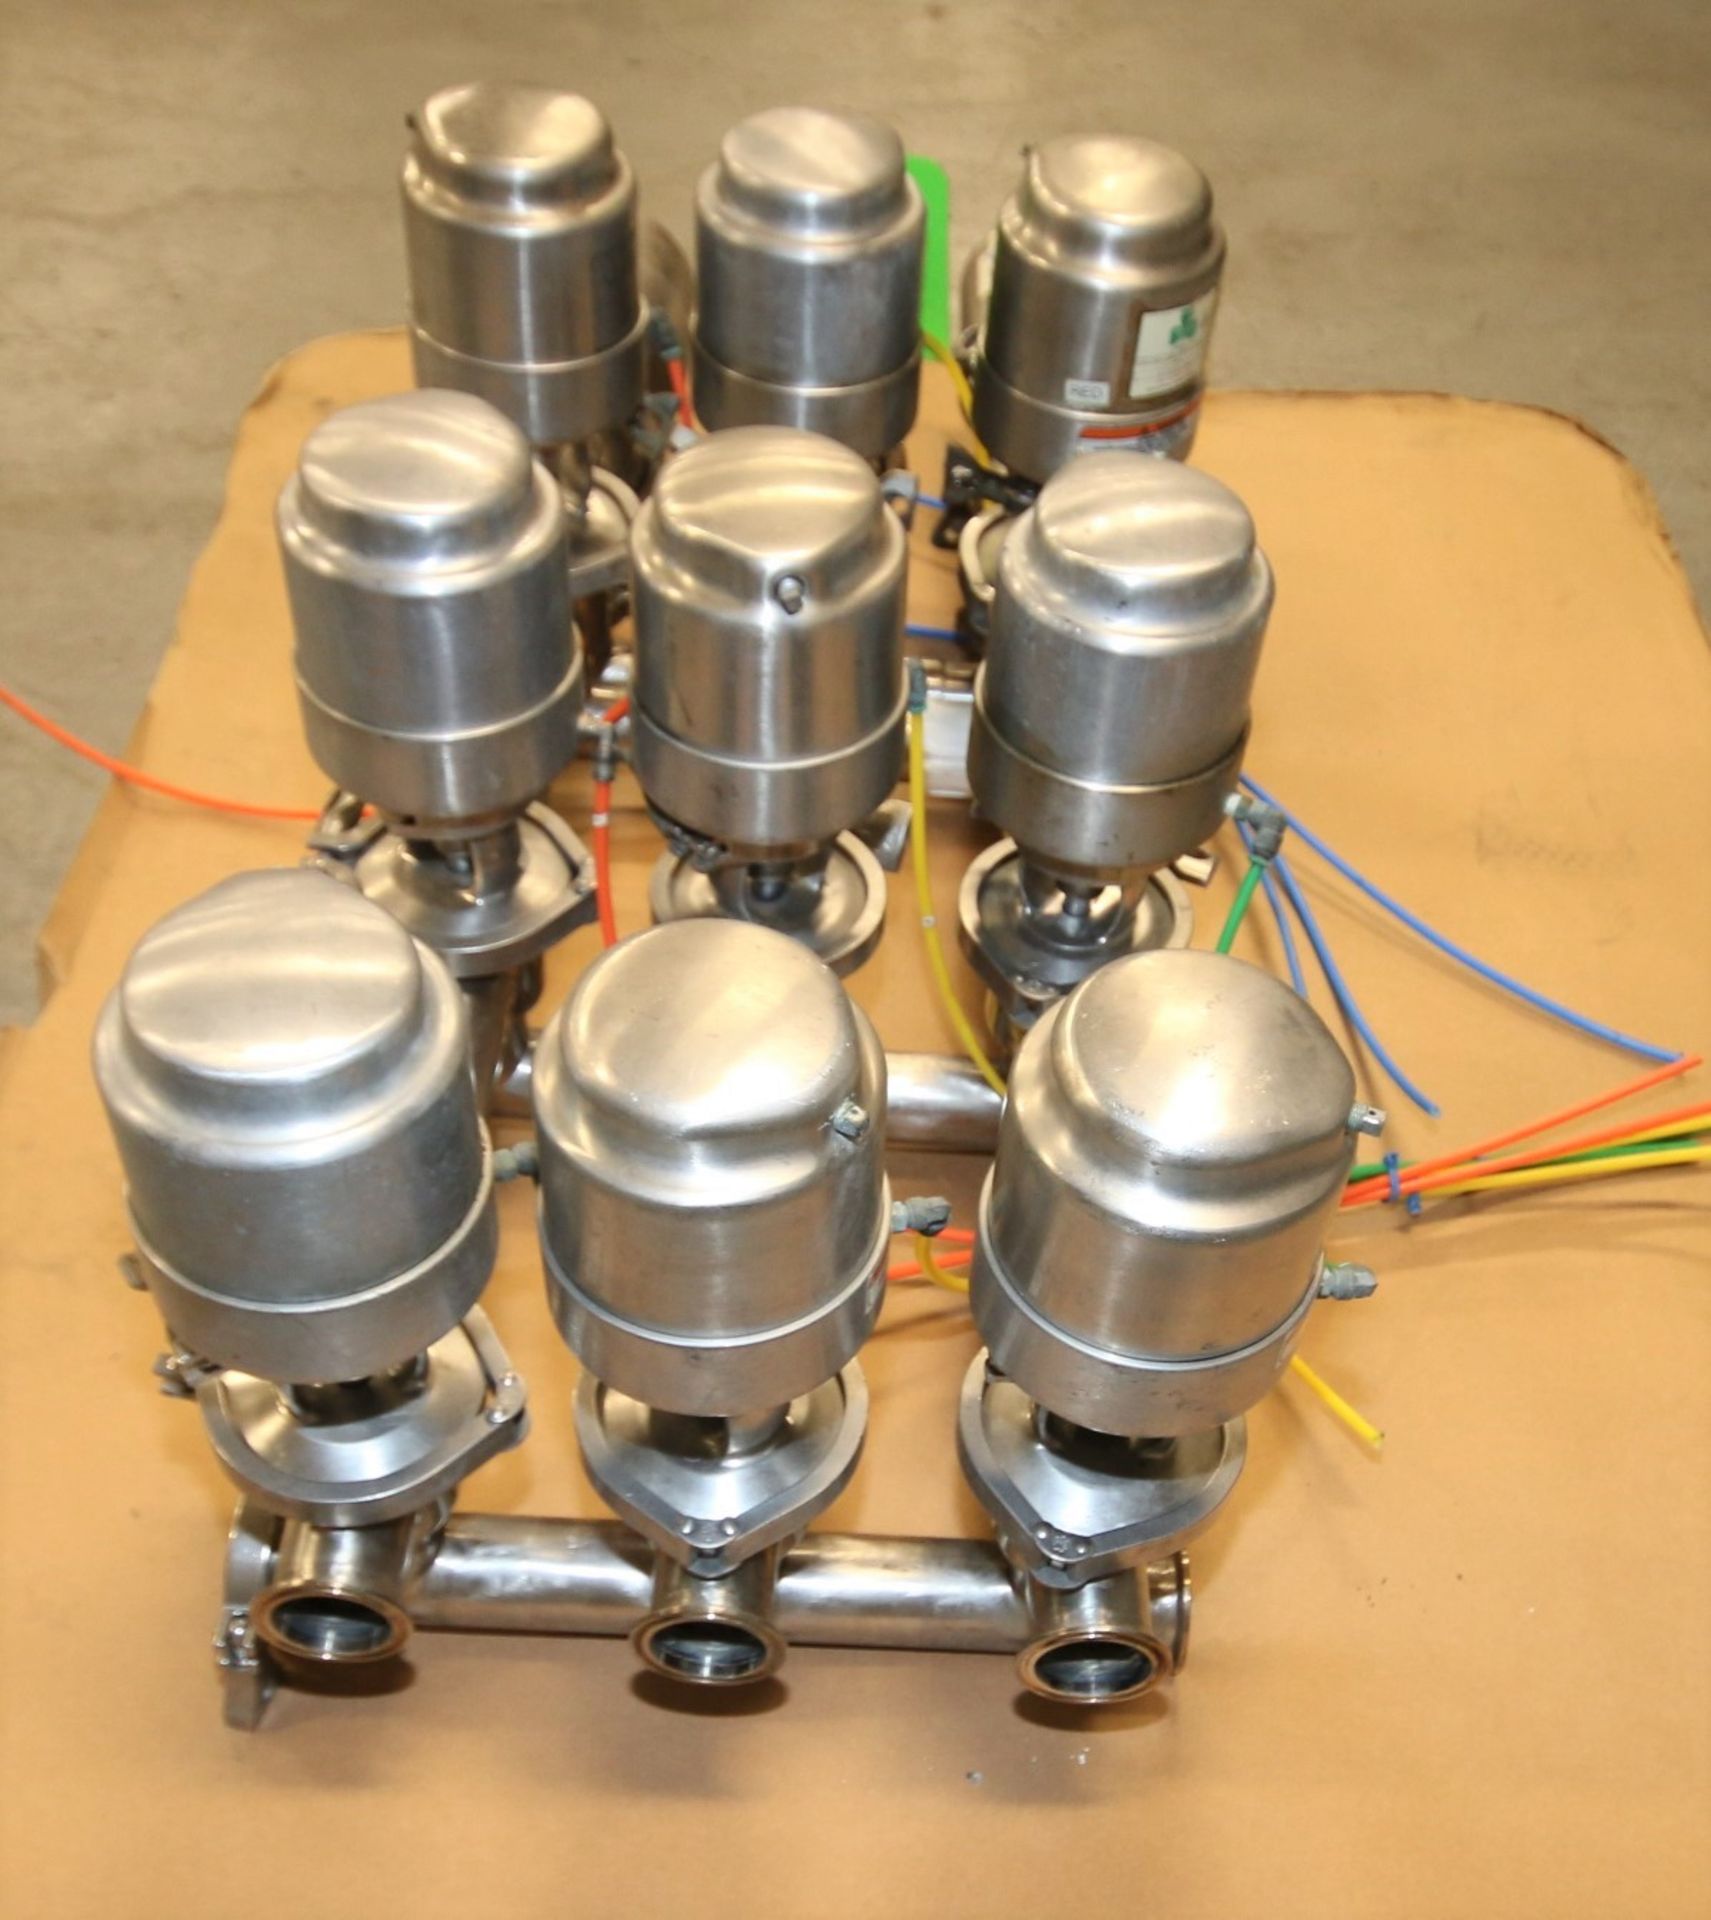 12-Valve Tri-Clover & WCB 2" S/S Air Valve Manifold / Cluster with Model 361 Valves, - Image 3 of 4